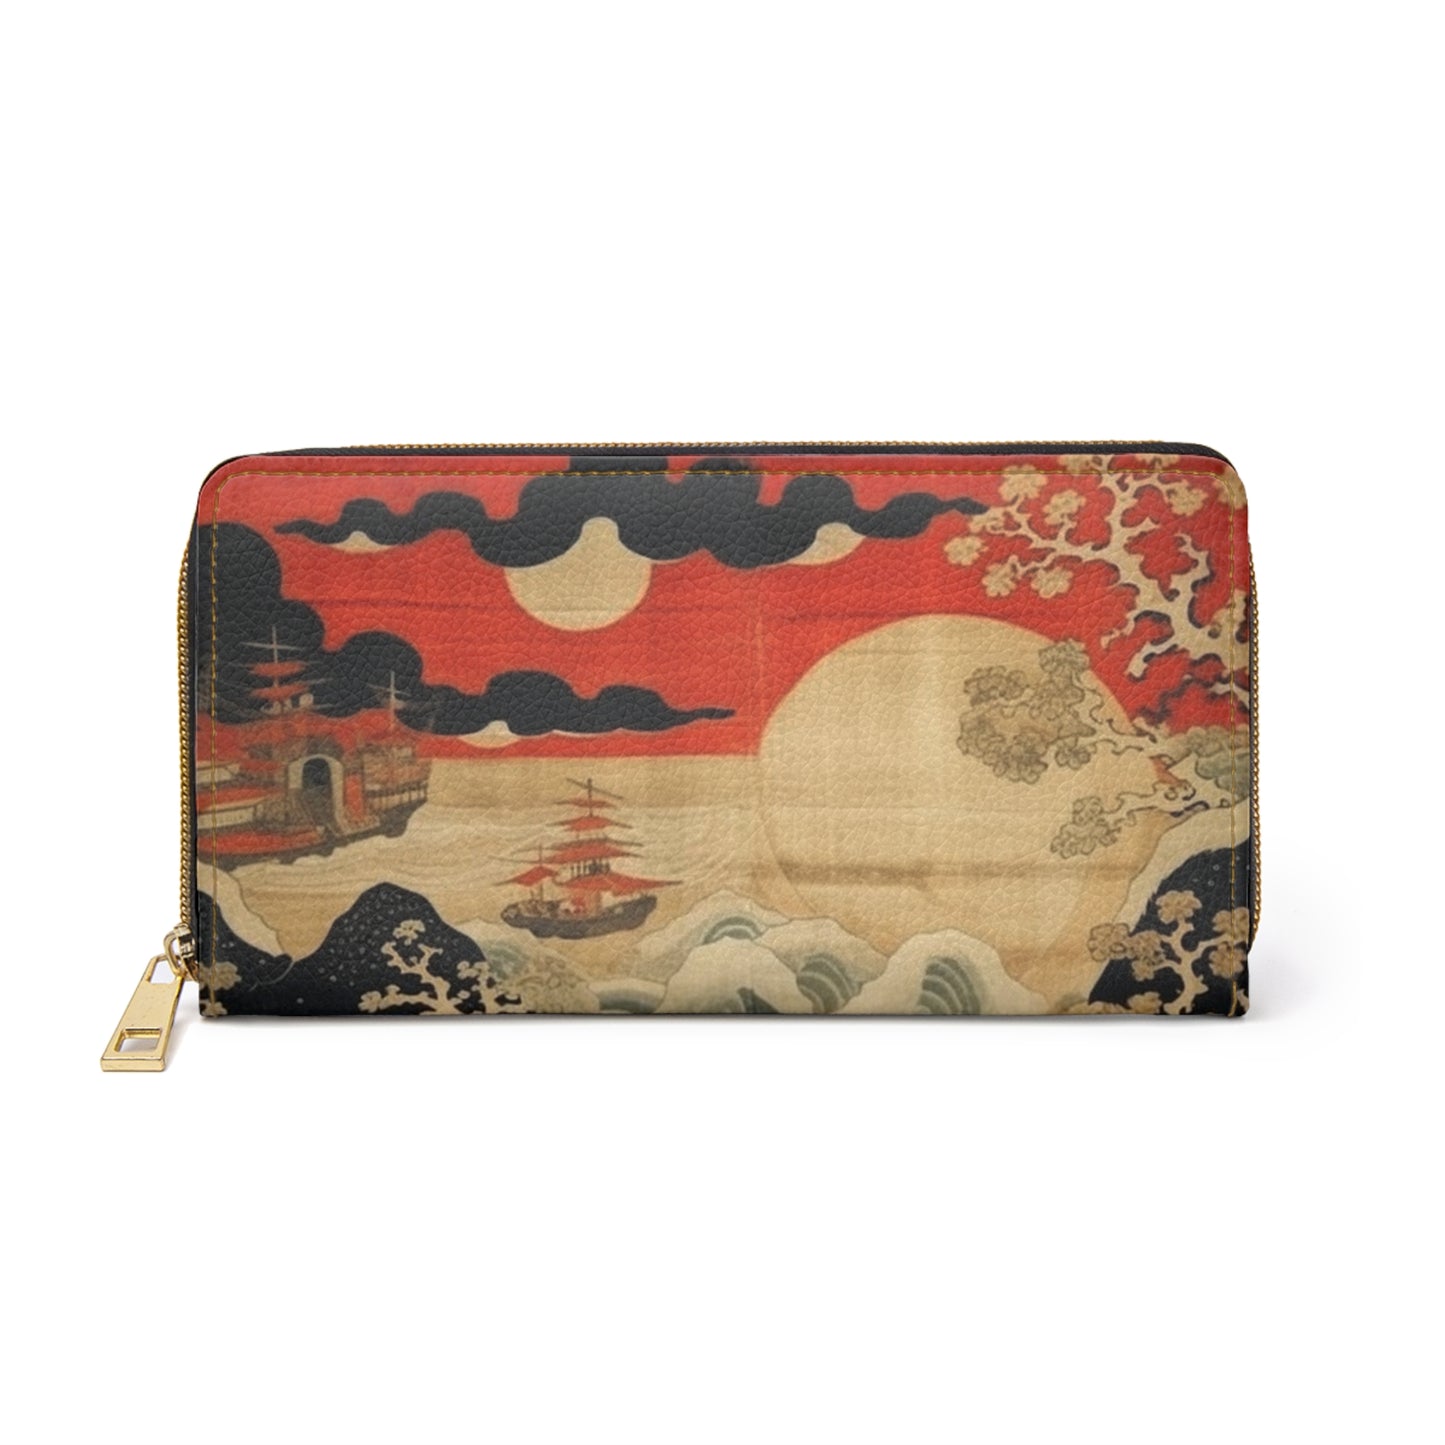 Artistic Fusion - Where Japanese Tapestry Meets the Perfect Zipper Wallet